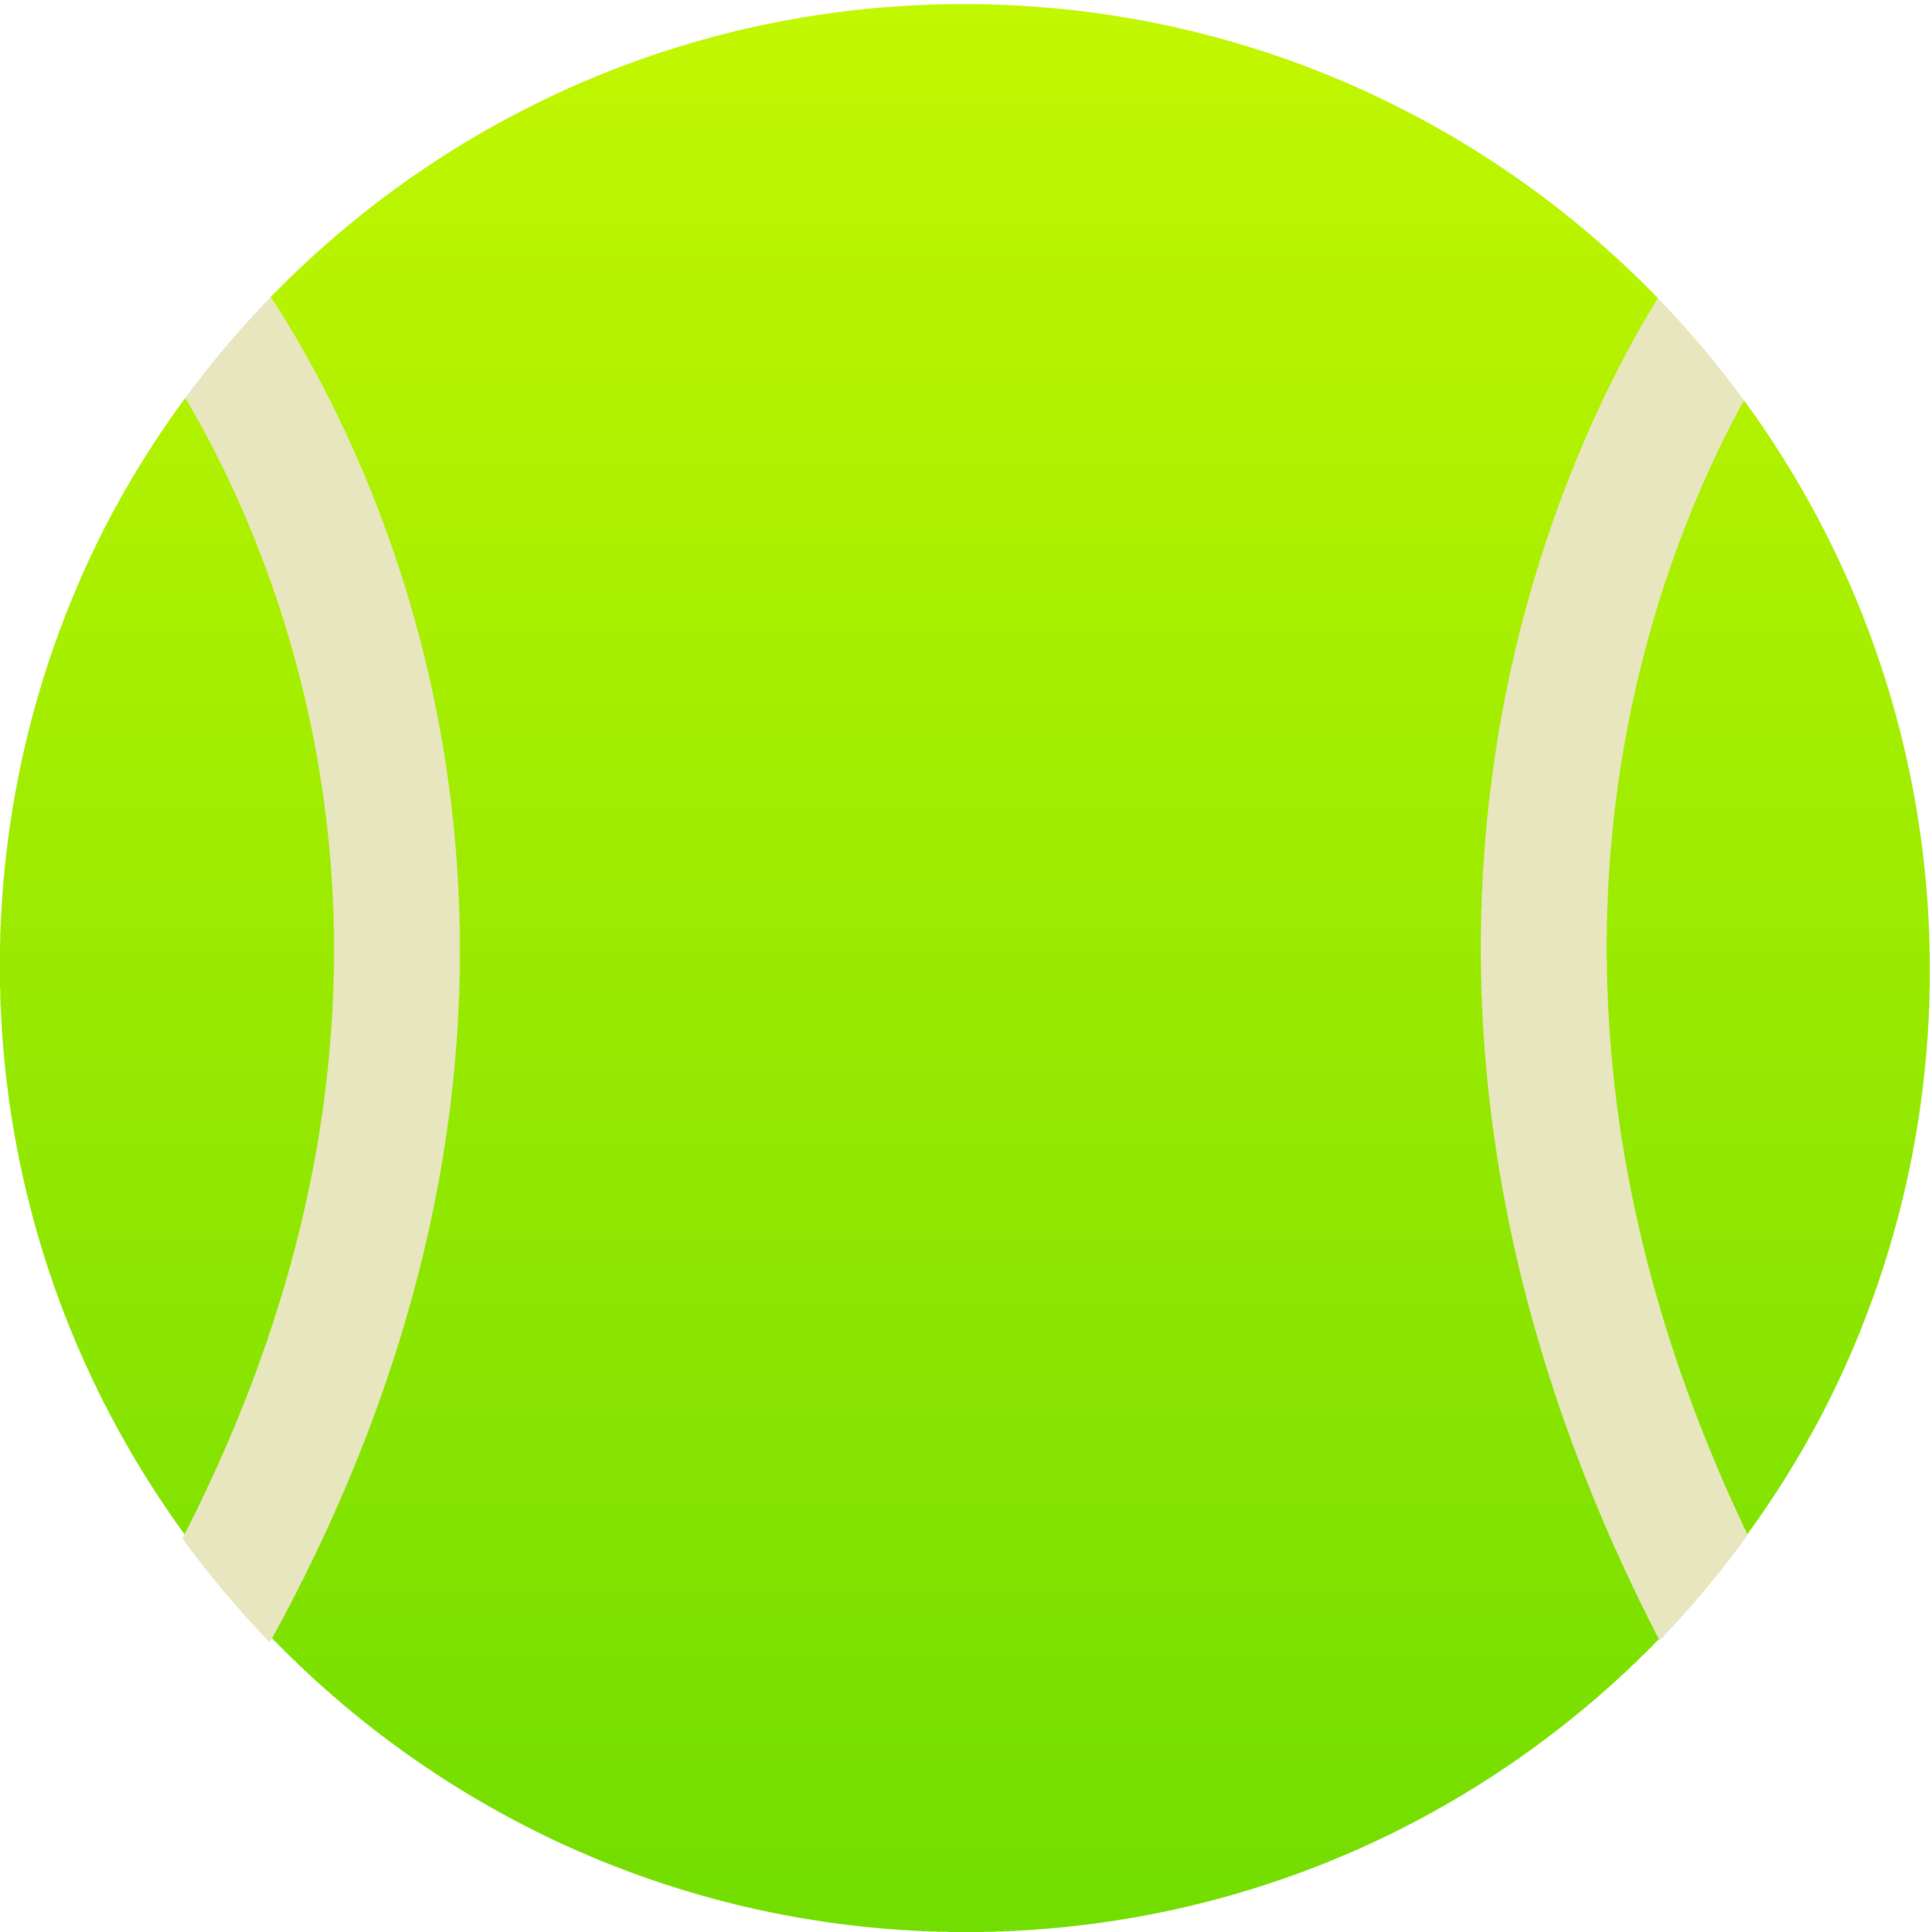 Tennis clipart image tennis racket and tennis ball image 2 image ...